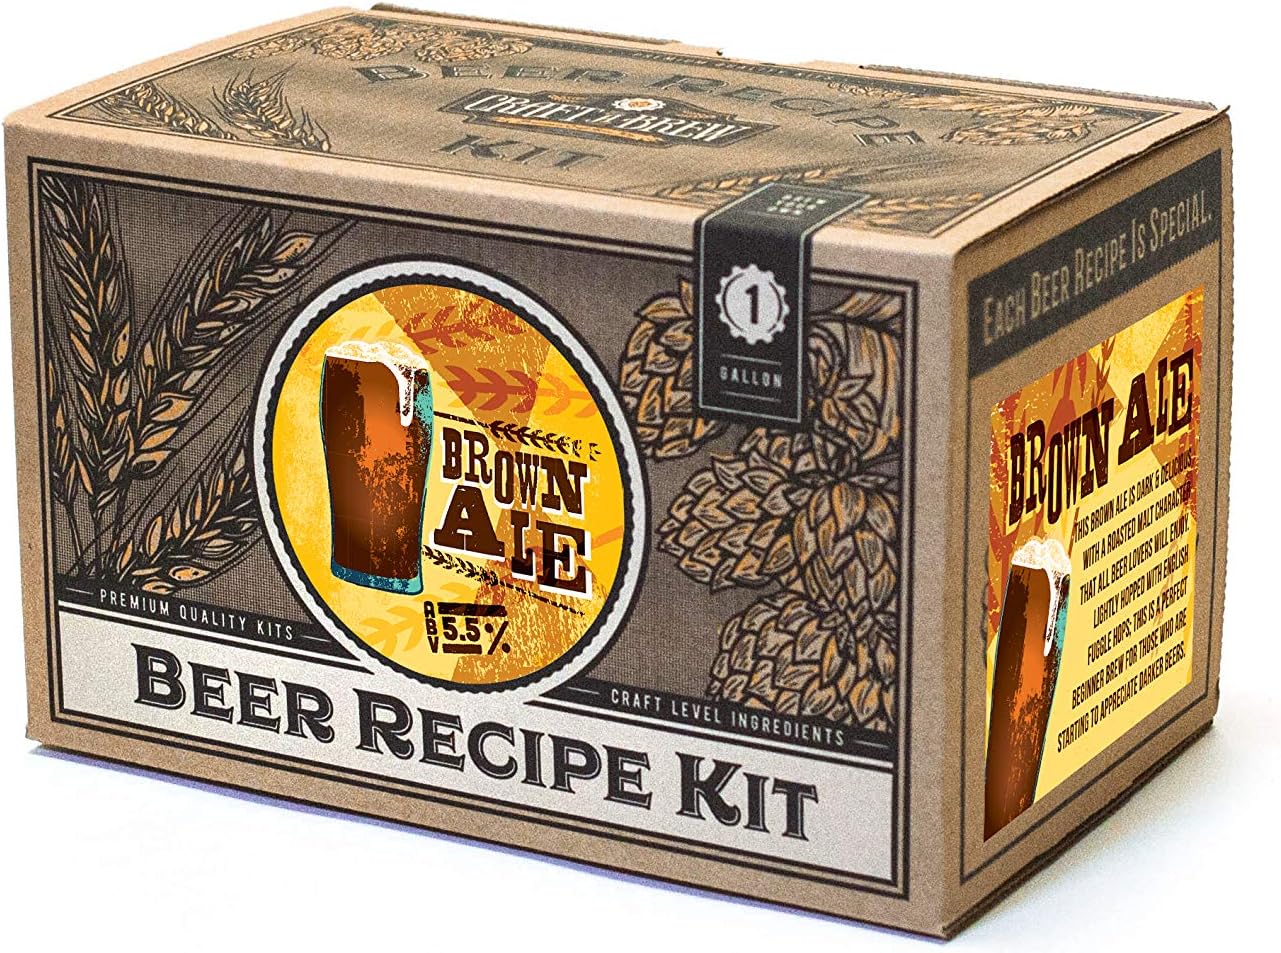 Brown Ale Refill Recipe Kit Review